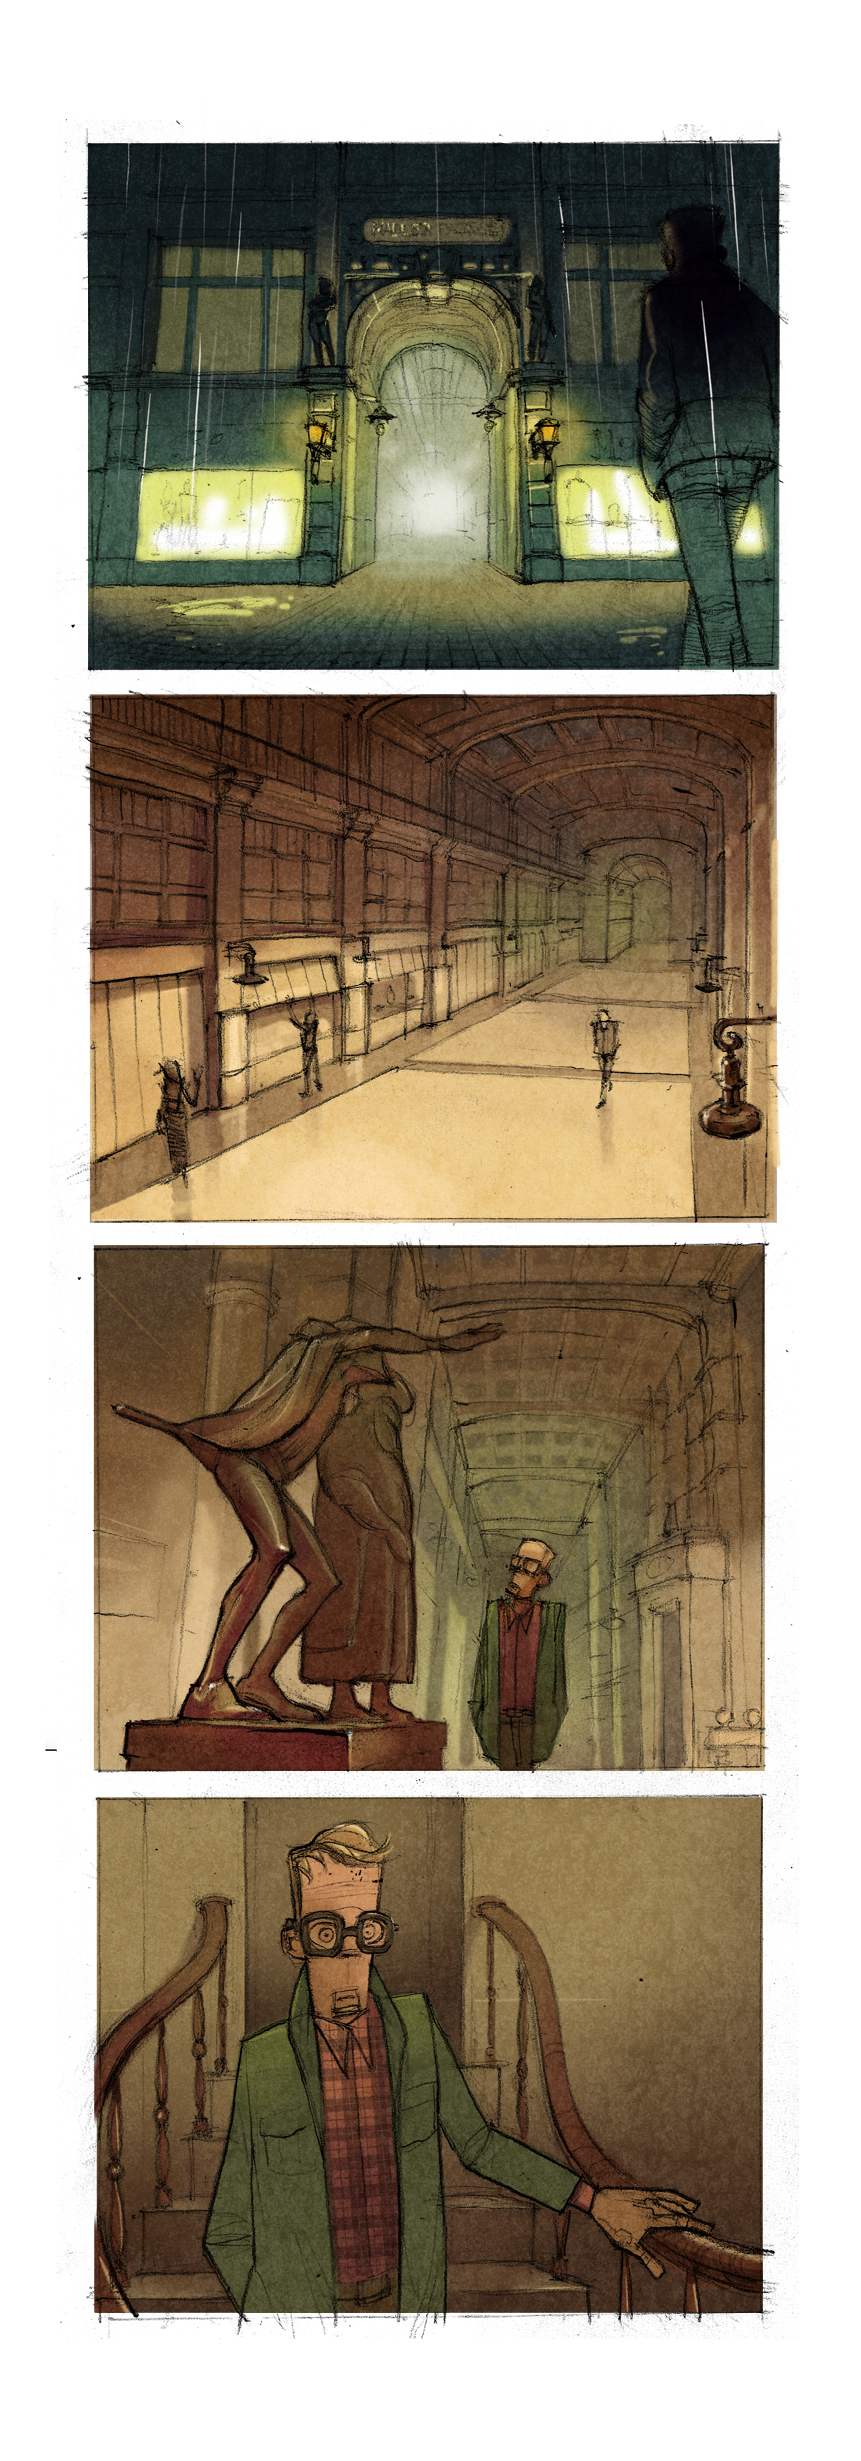 storyboard Faust Mephistopheles Auerbach's cellar photoshop painting Comic Book 2D